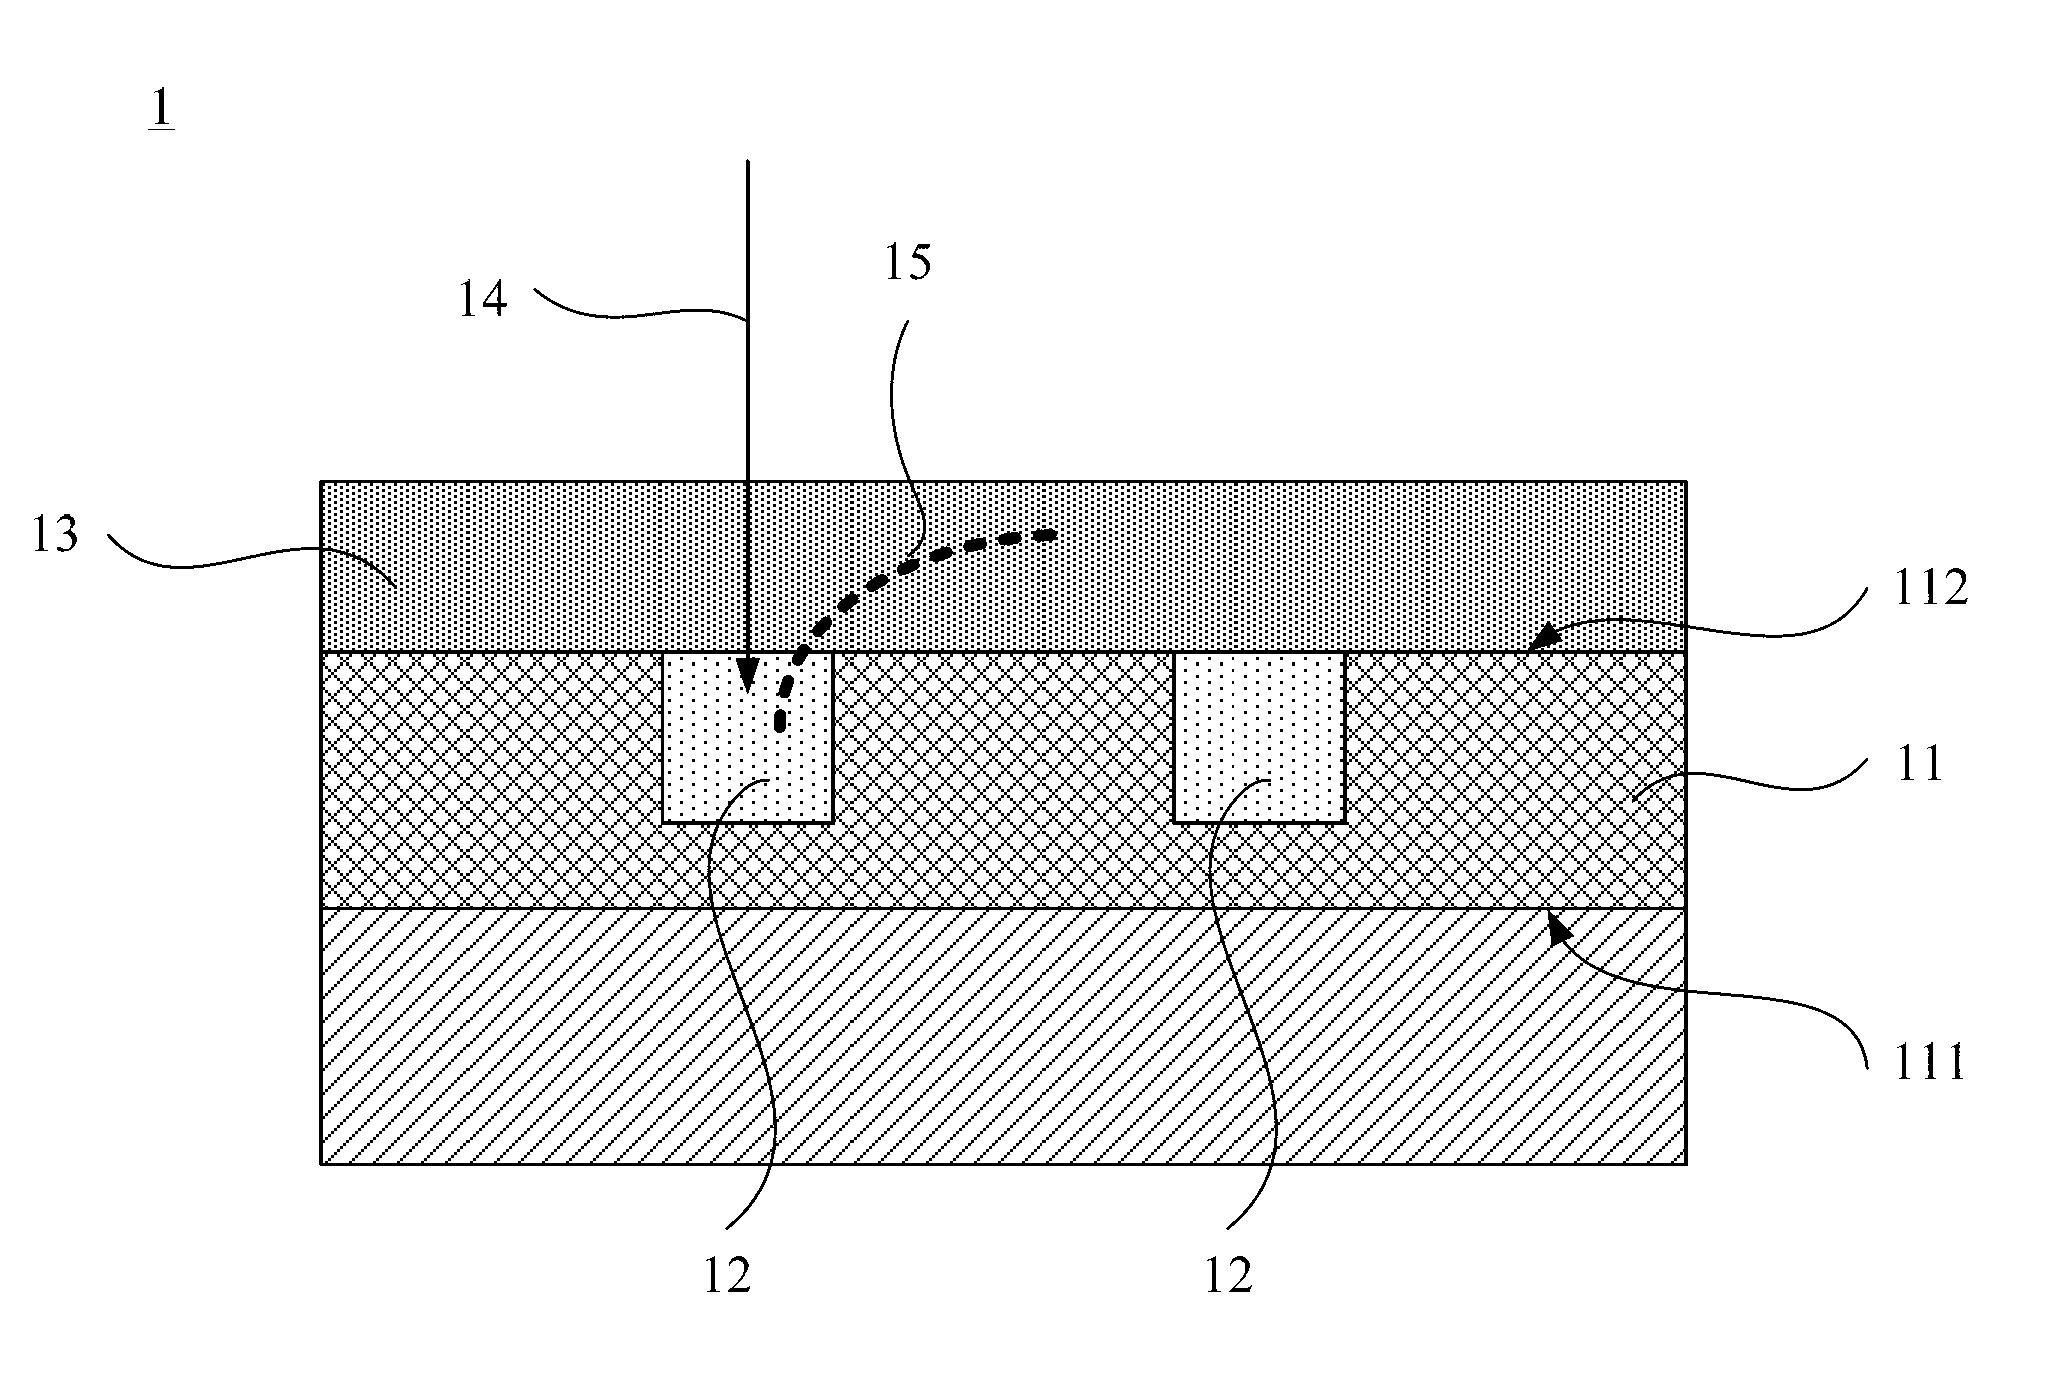 Back-illuminated CMOS (complementary metal oxide semiconductor) image sensor